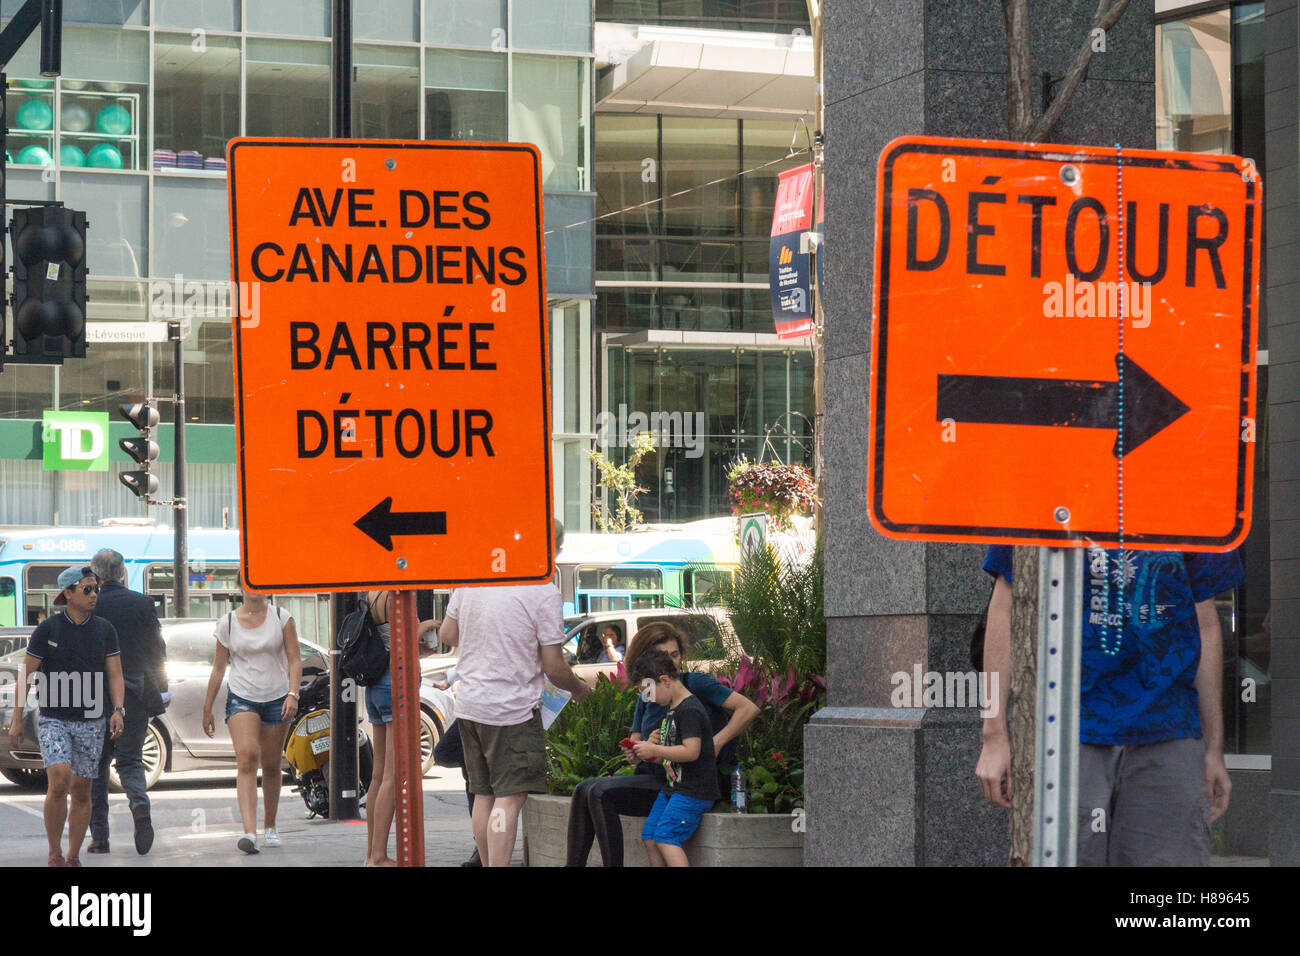 Montreal roadworks - detour signs in Montreal city centre Stock Photo